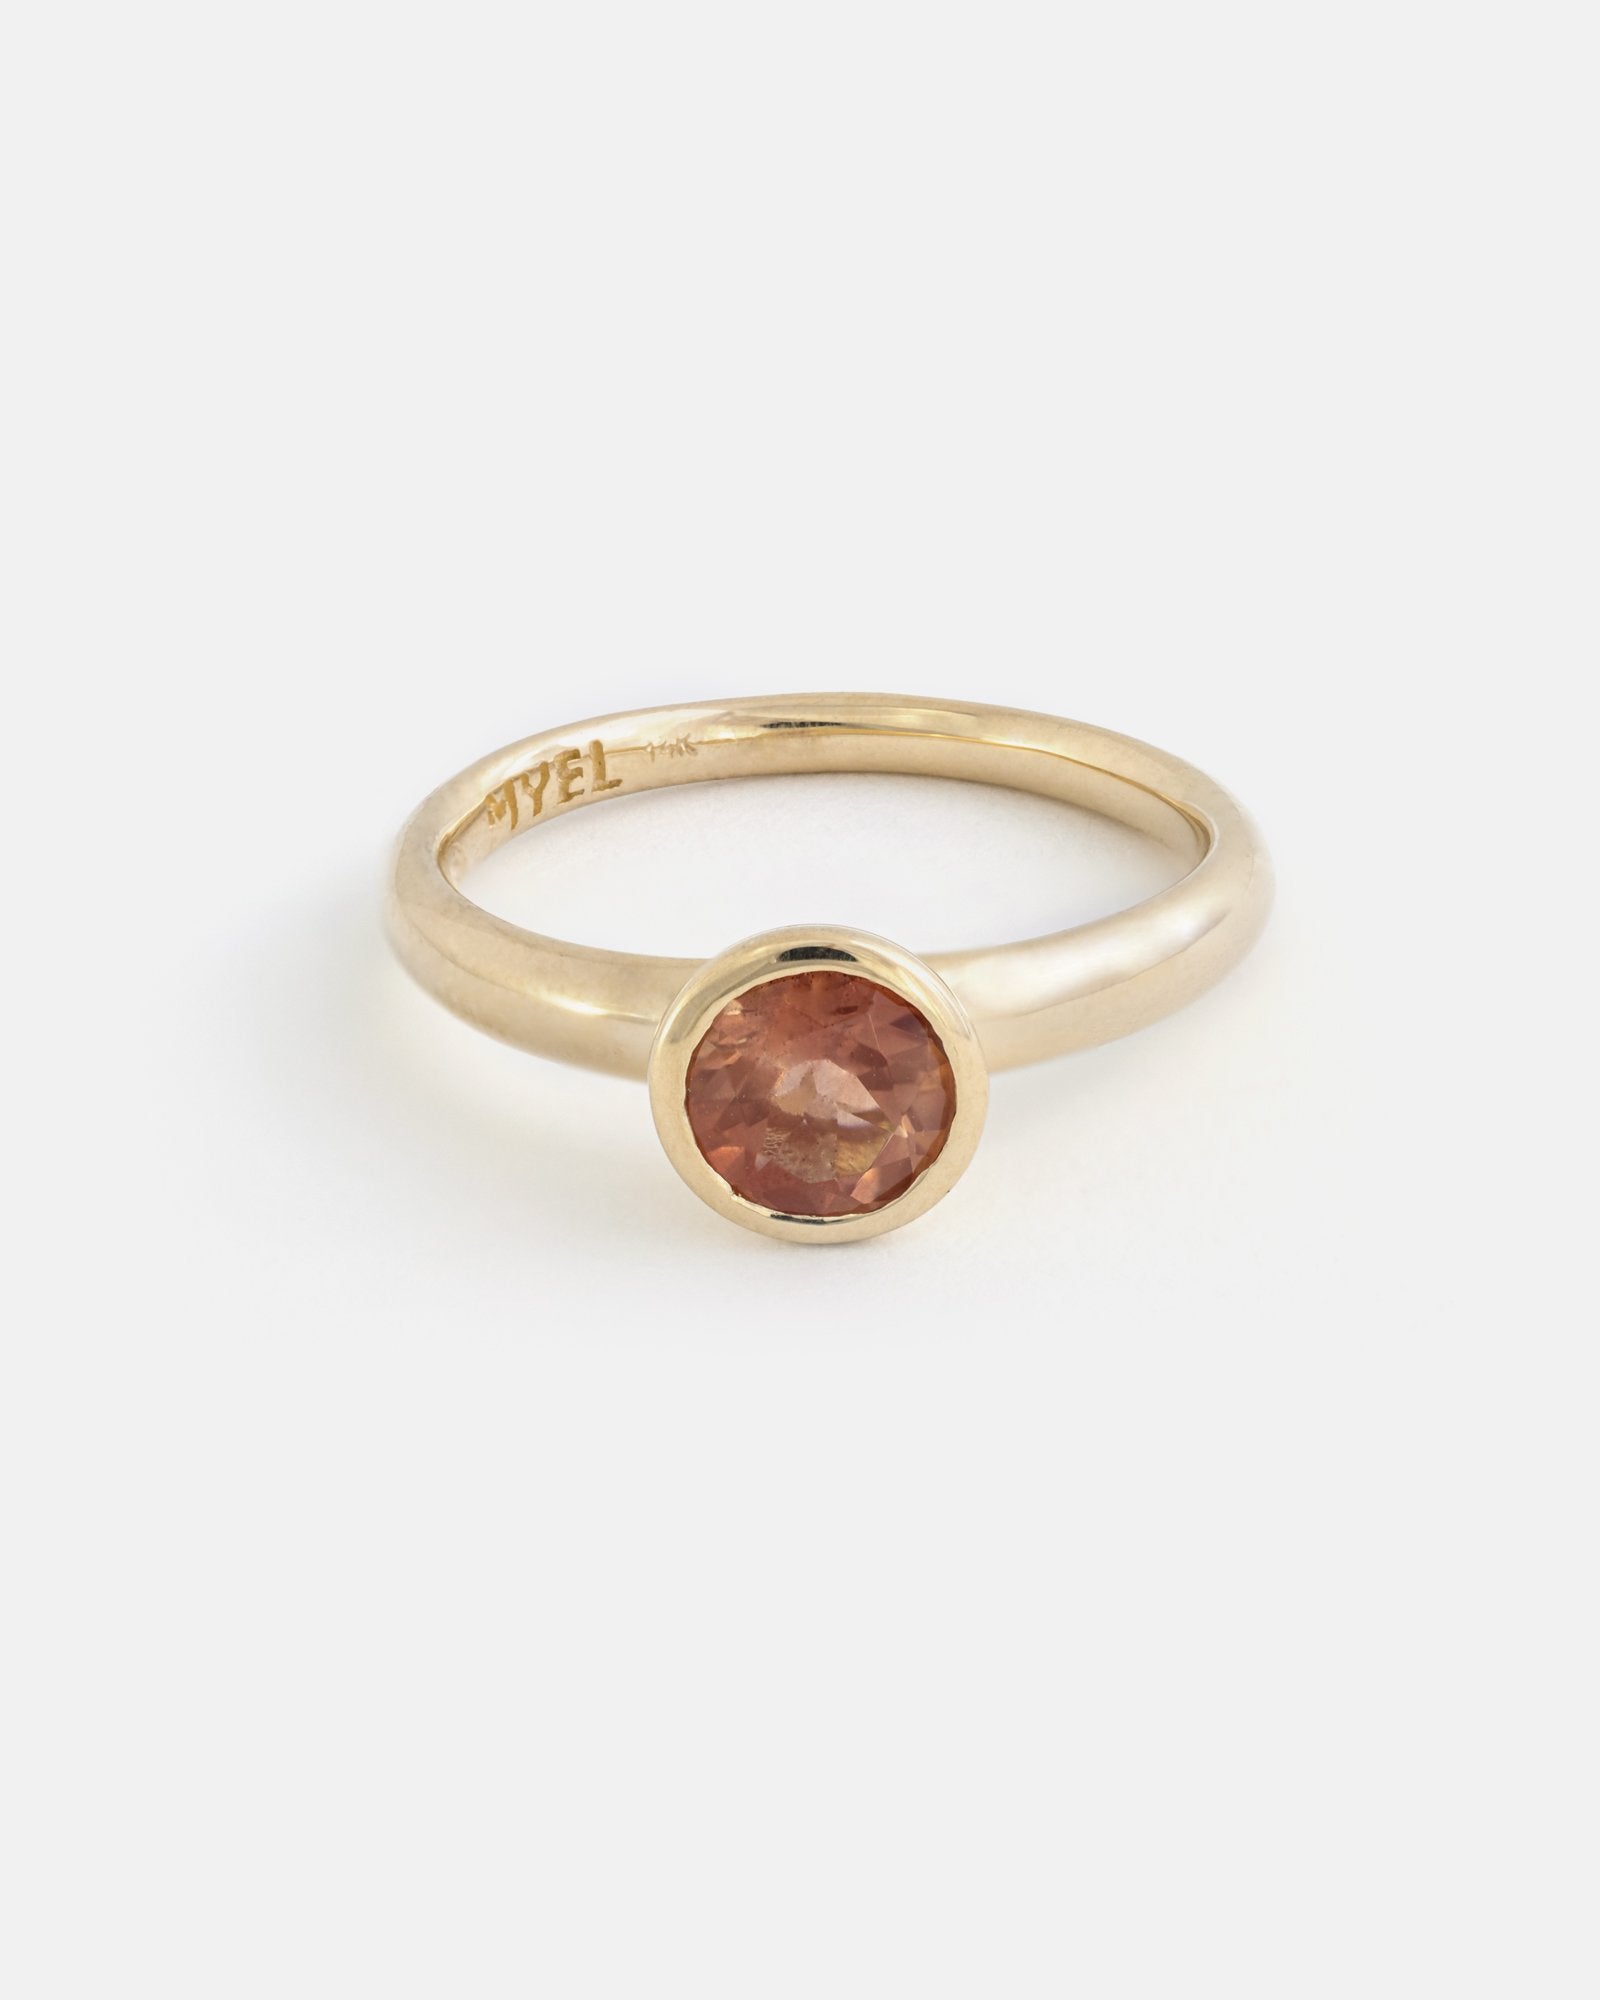 Round Vara Ring in Fairmined Gold with Oregon Sunstone